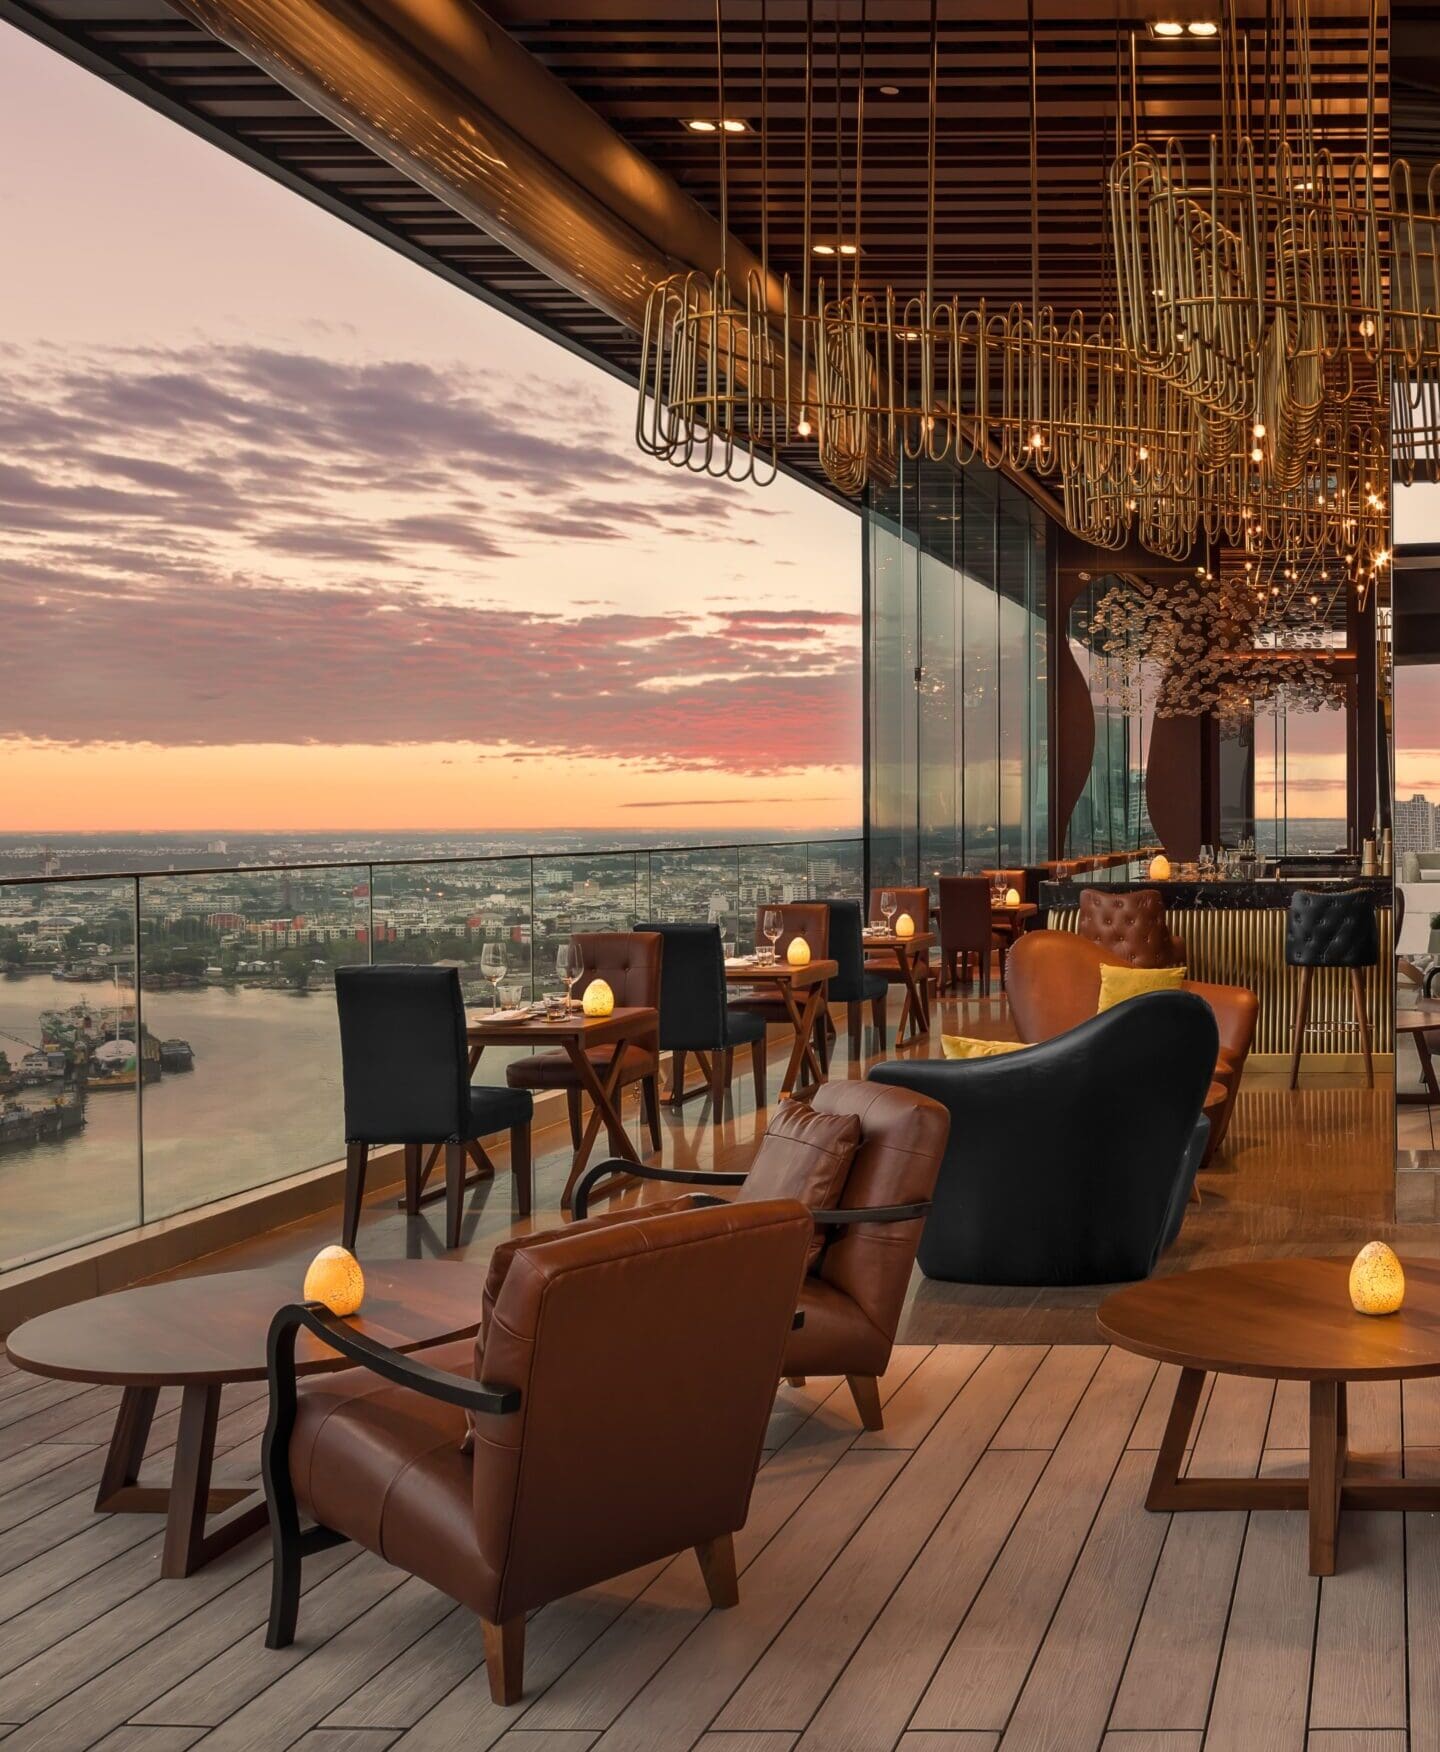 The rooftop Seen Bar at Avani+ Riverside Bangkok Hotel, with views across the city